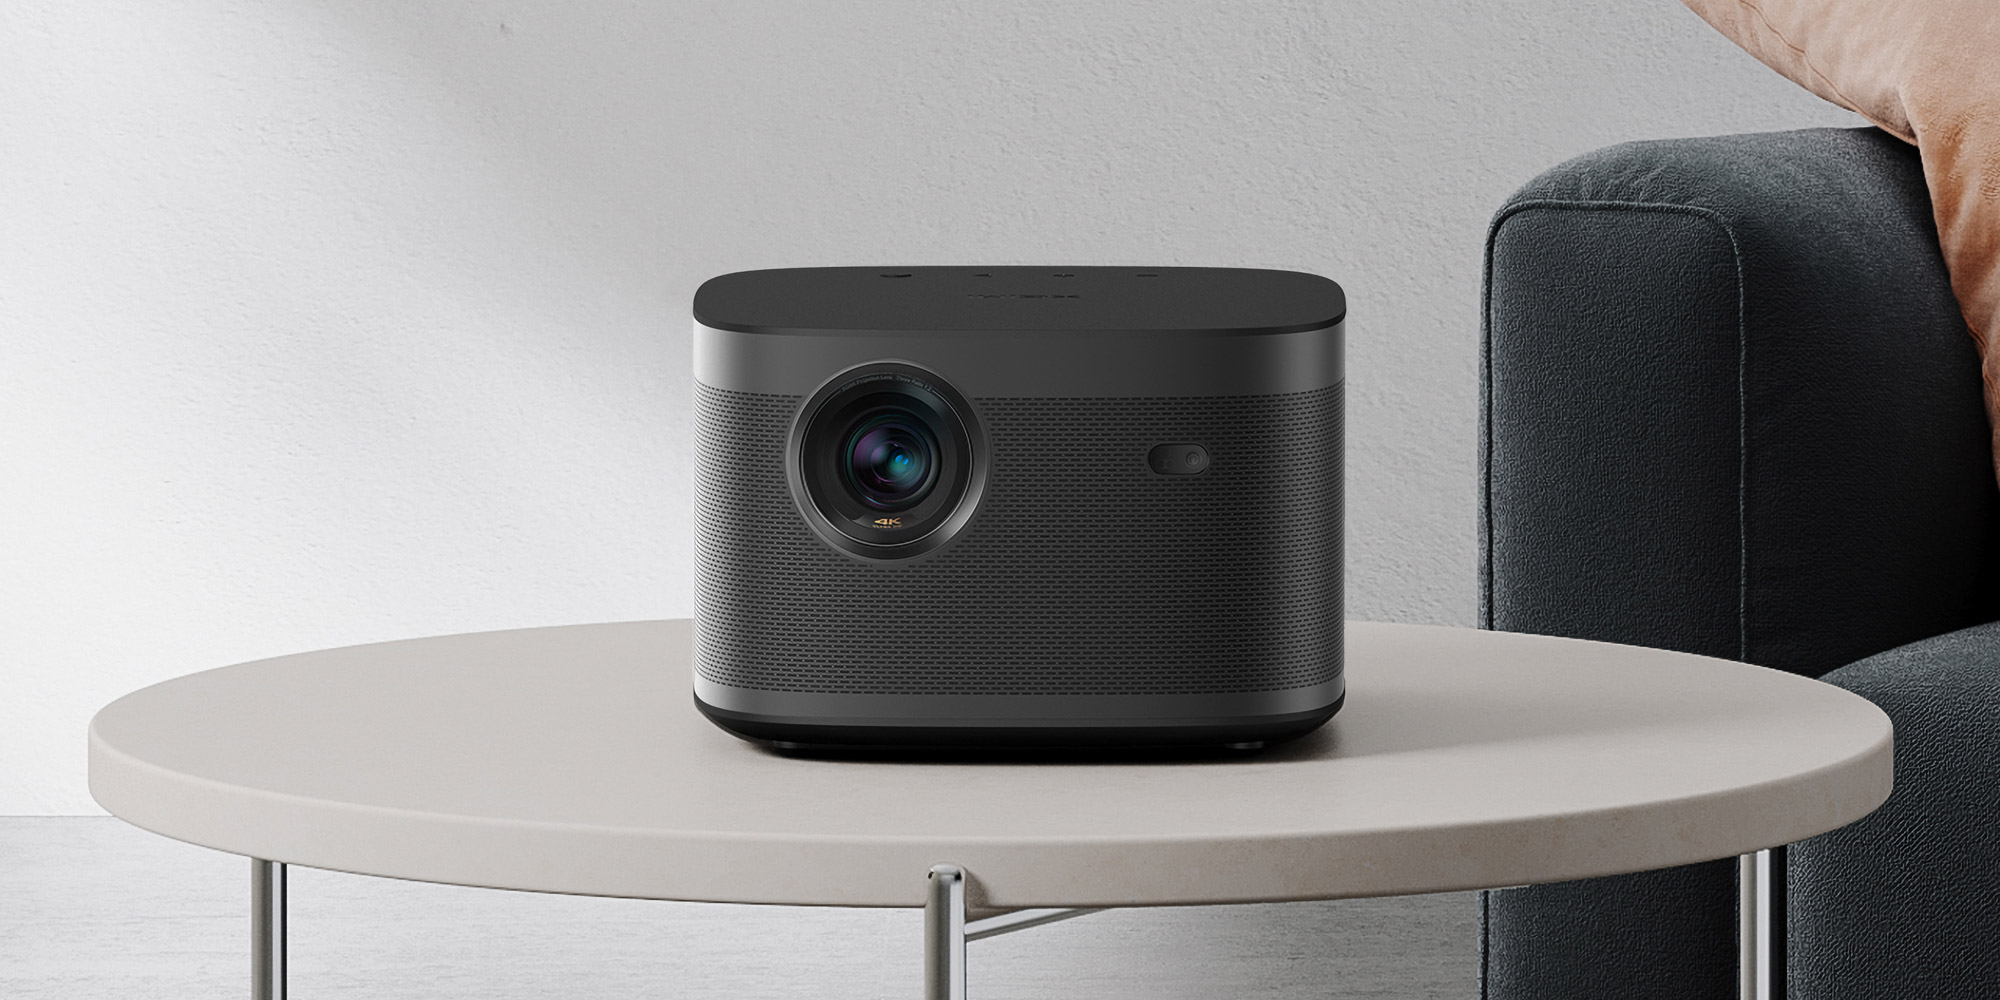 XGIMI offering special discounts on its home projectors during Prime Day